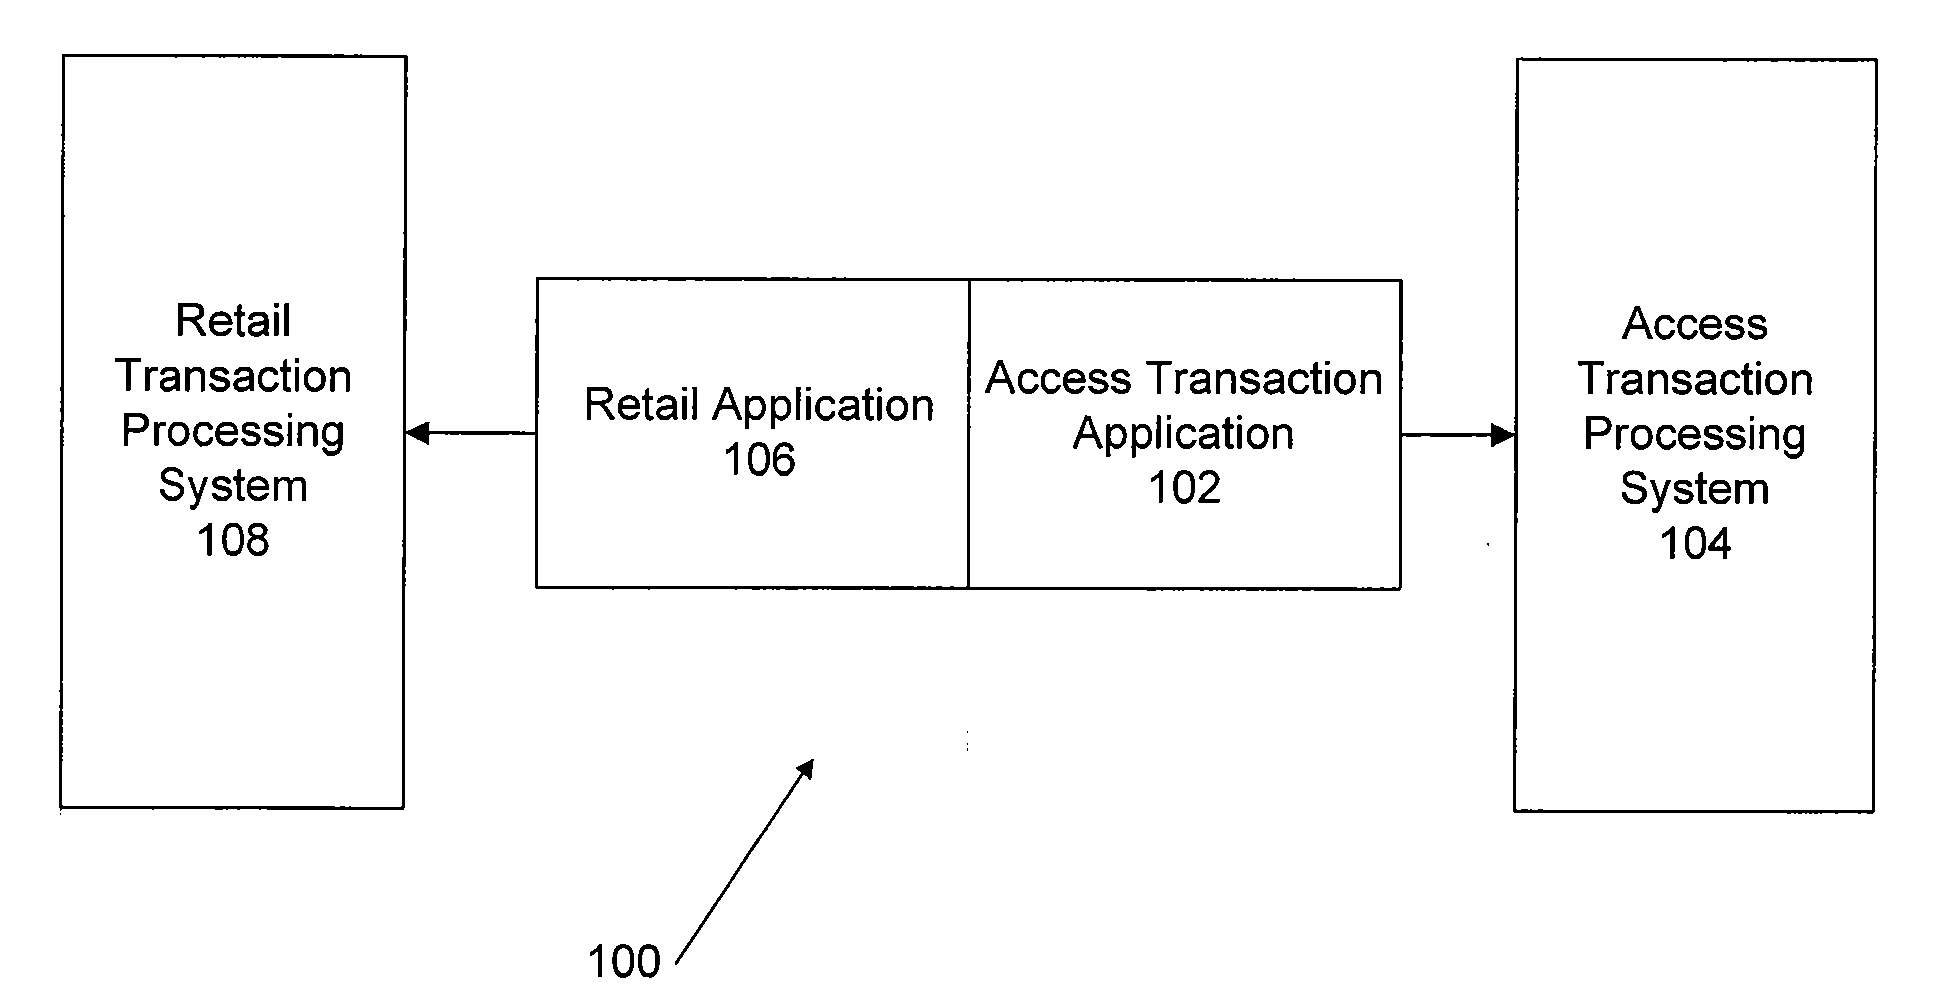 Authentication of a data card using a transit verification value